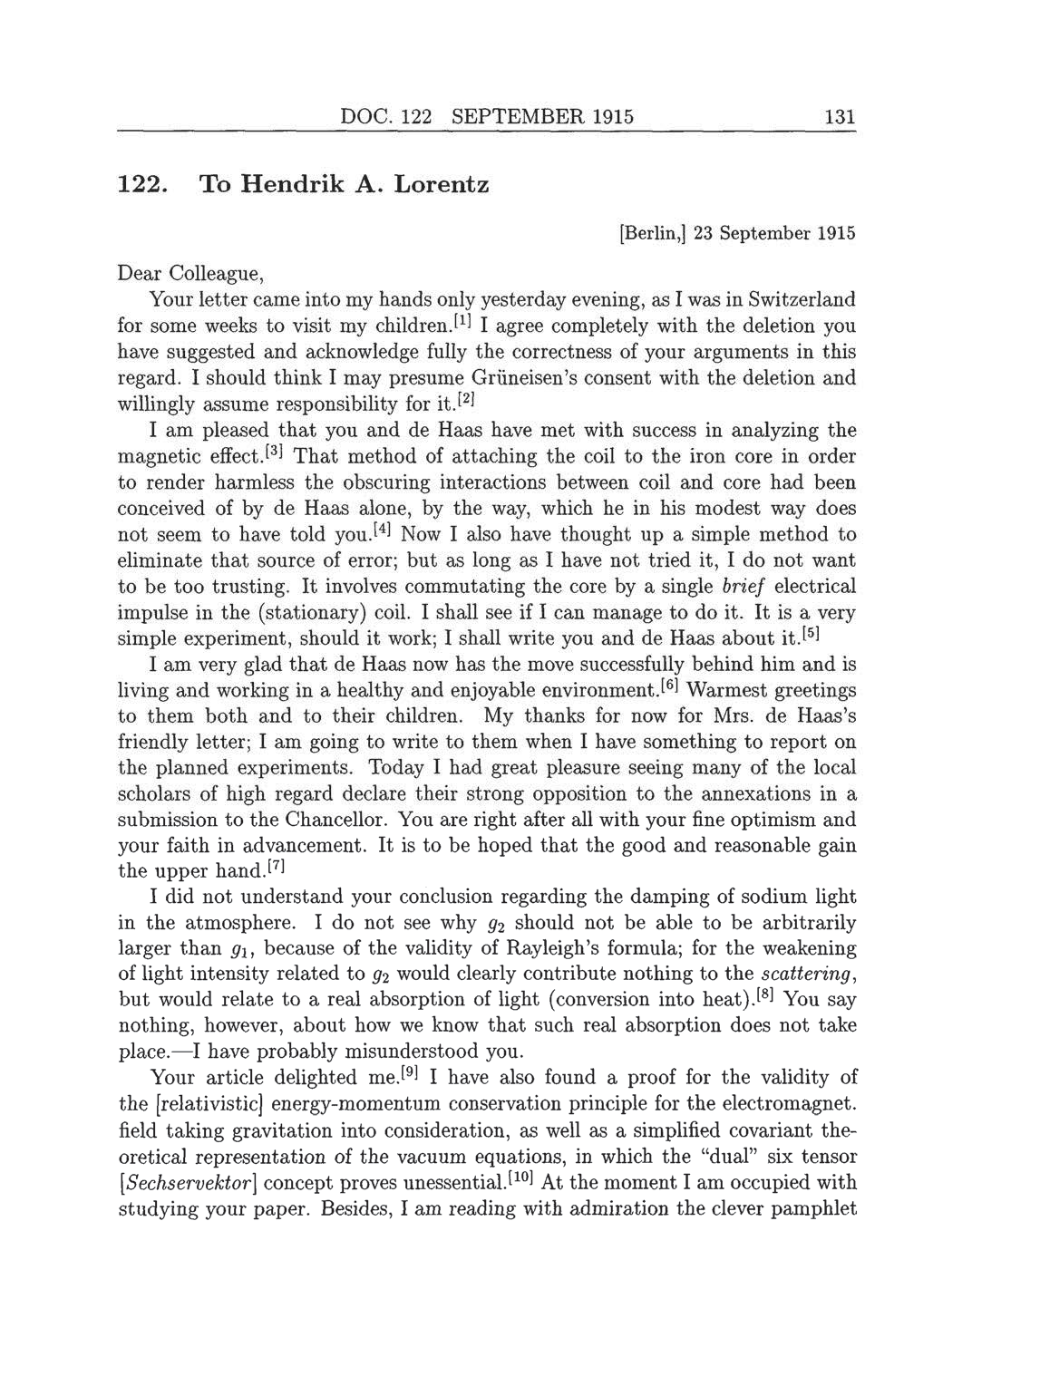 Volume 8: The Berlin Years: Correspondence, 1914-1918 (English translation supplement) page 131